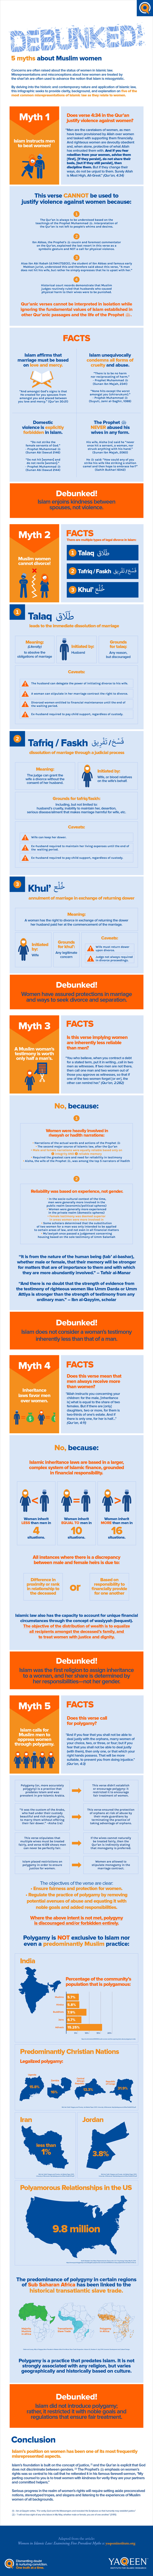 Myths About Women in Islam